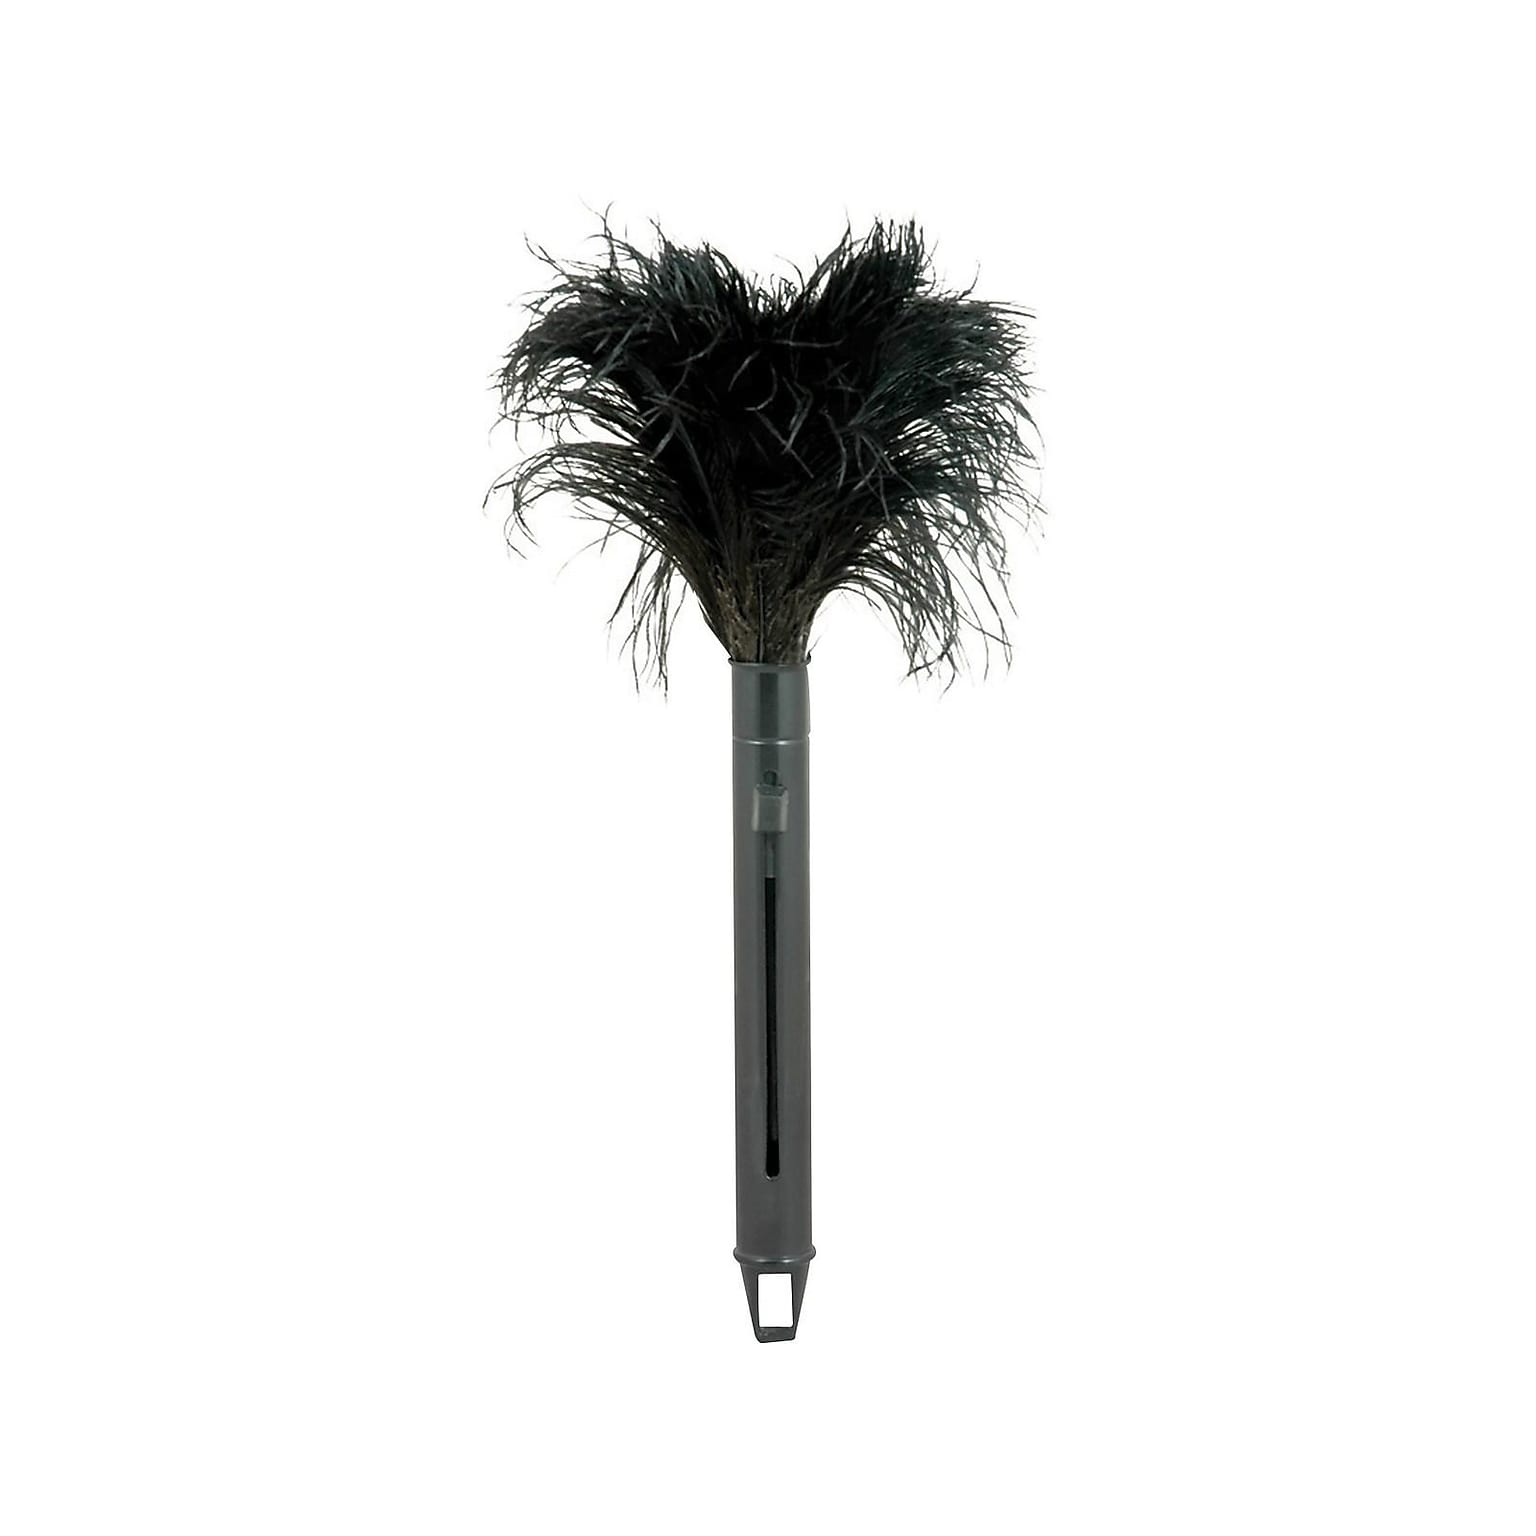 ODell Feather Dusters, Black 12/Box (DOF-RET14)